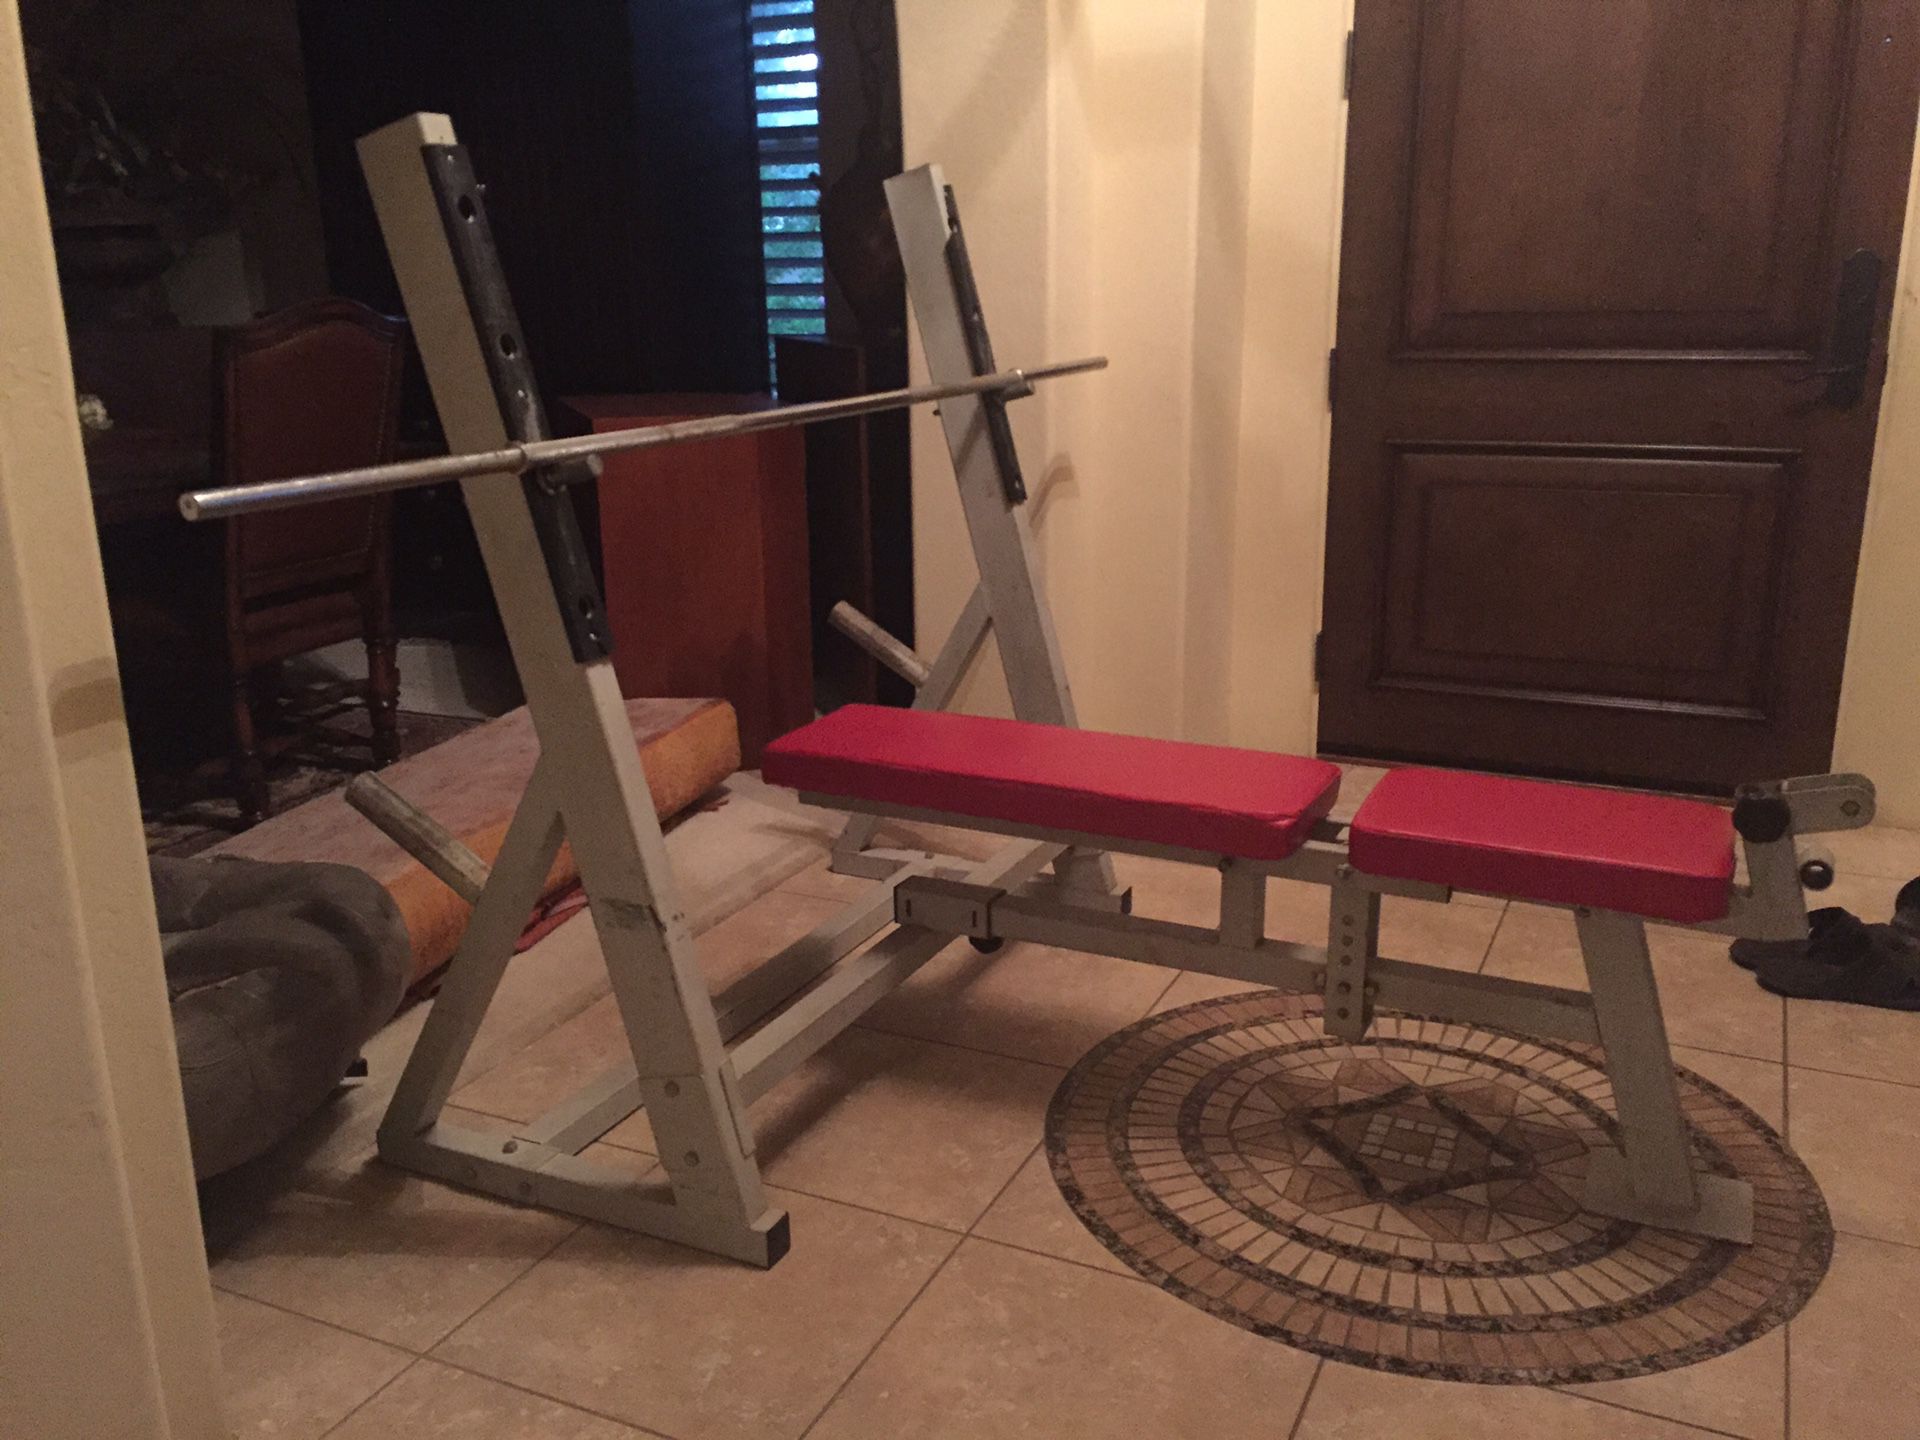 Olympic Full Size Adjustable Bench Press with 7 Foot Standard Barbell